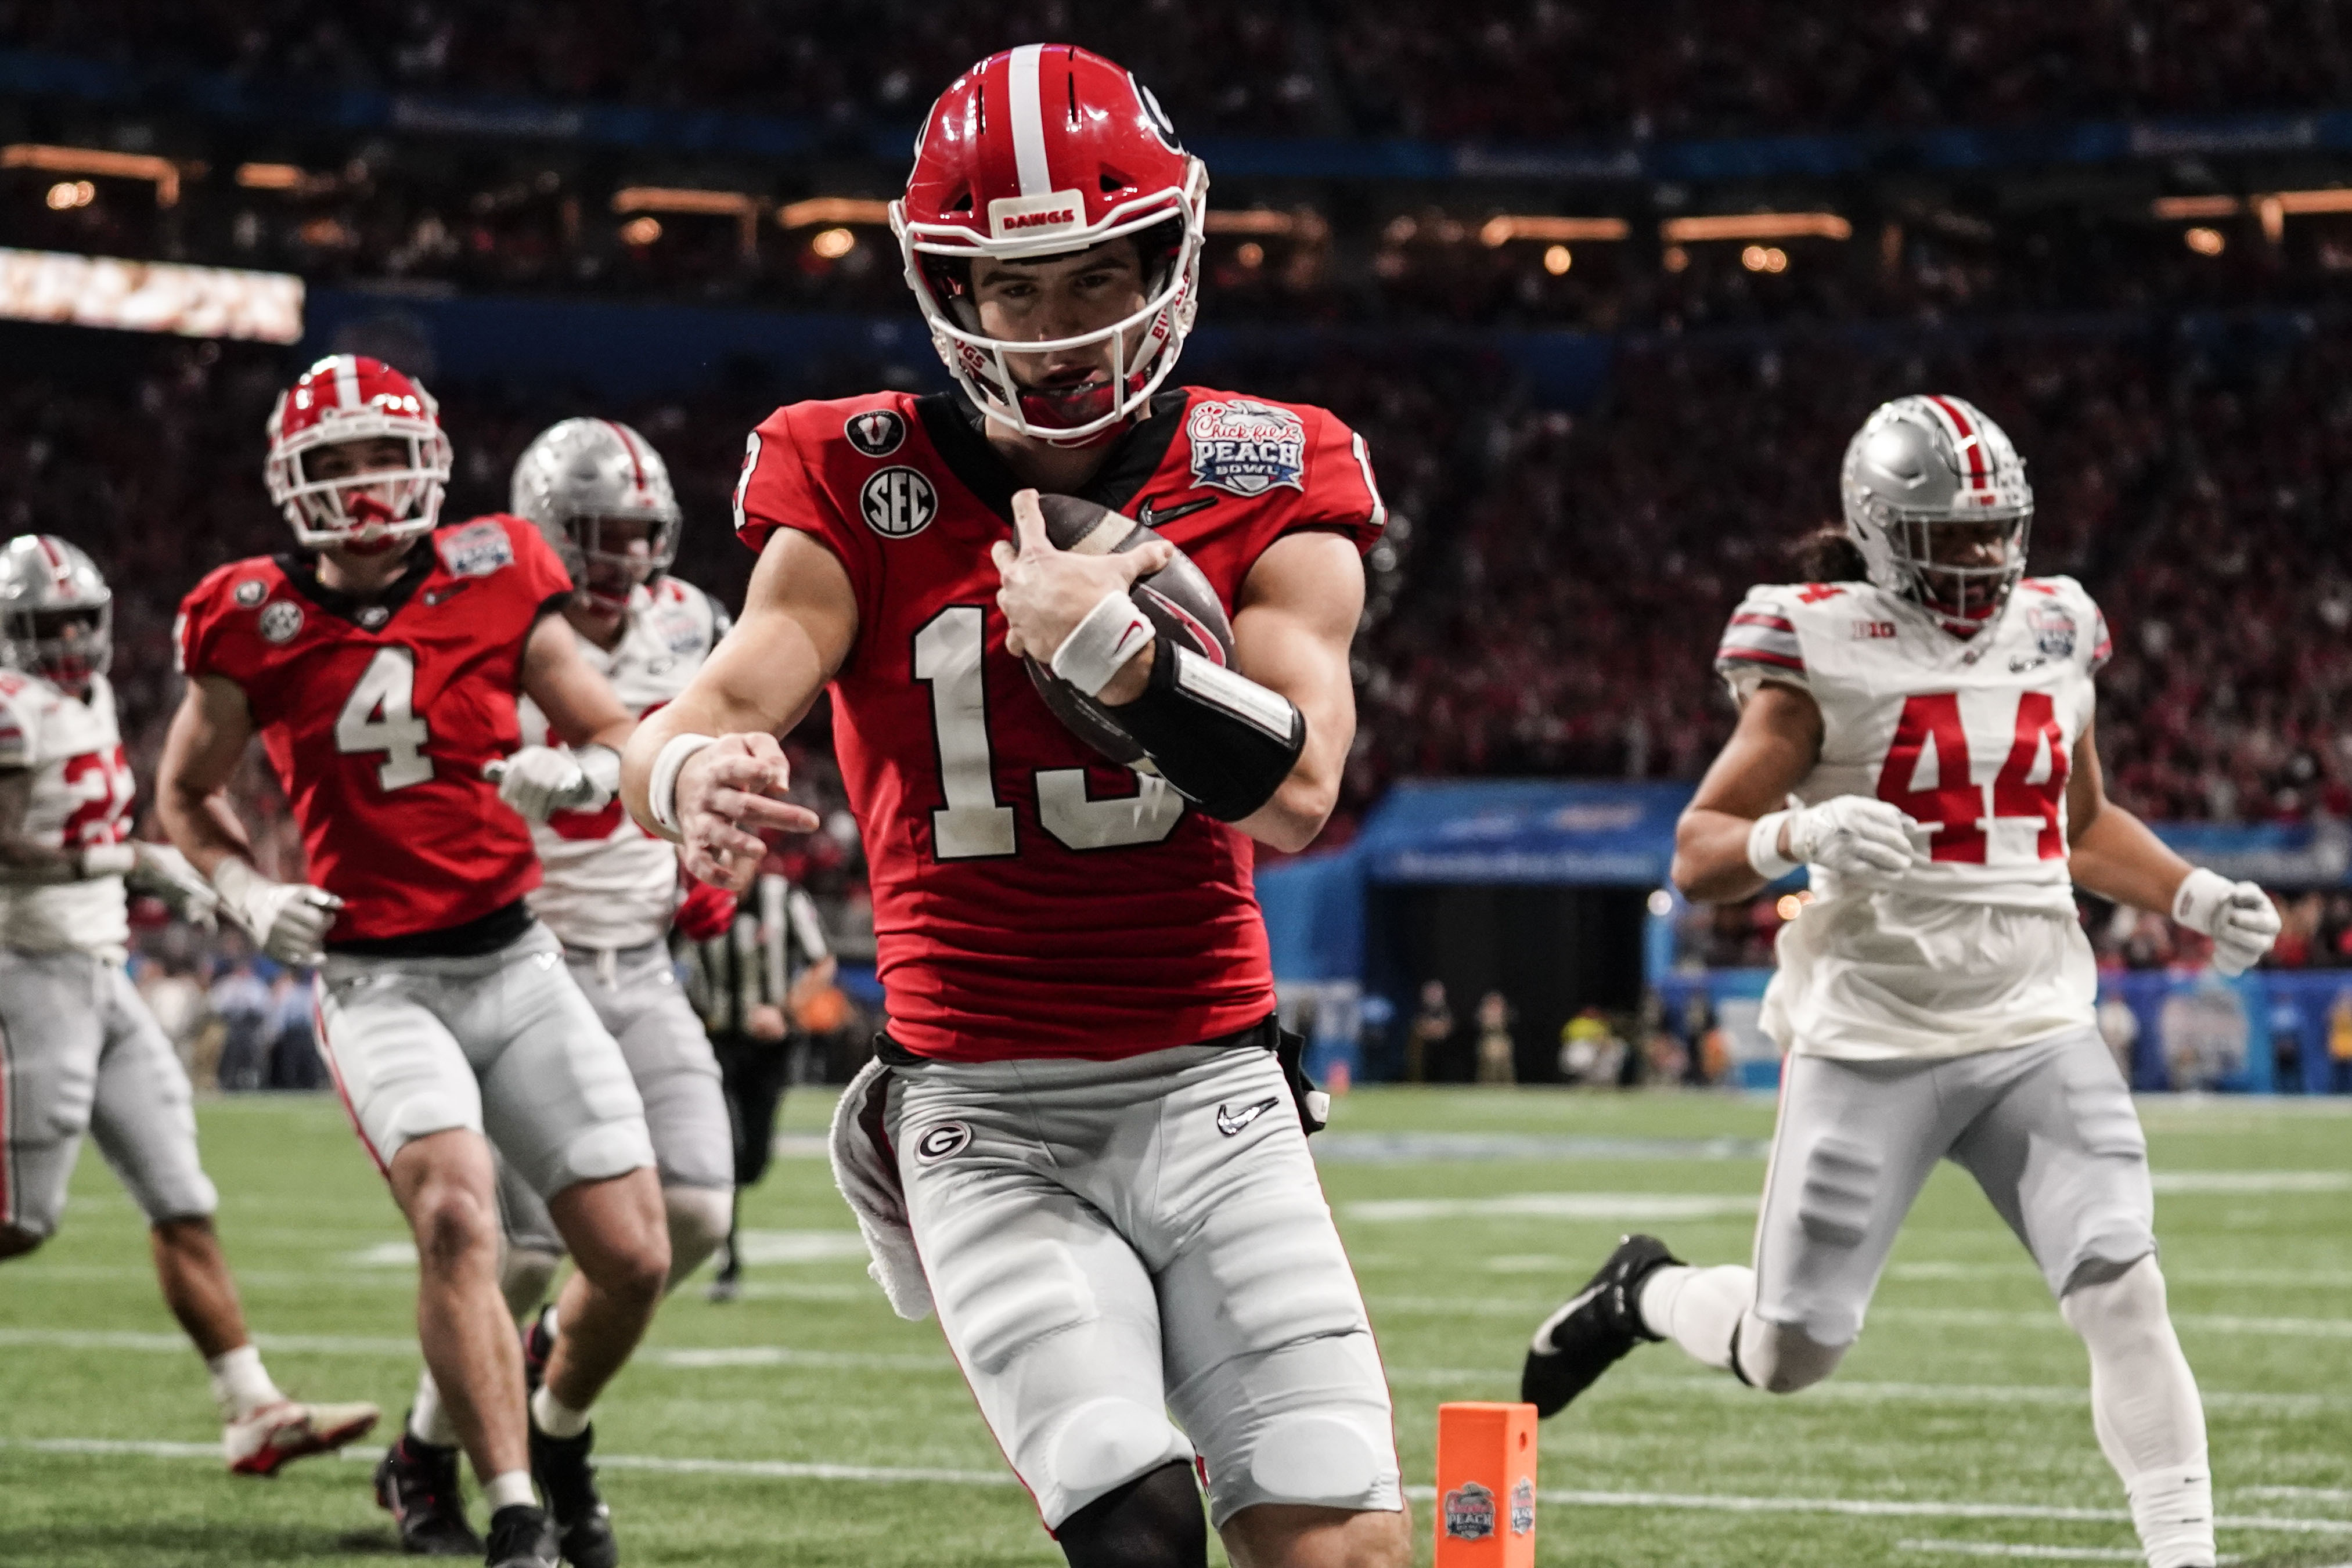 CFP National Championship teams: Who is playing in the College Football  Playoff title game January 10 - DraftKings Network